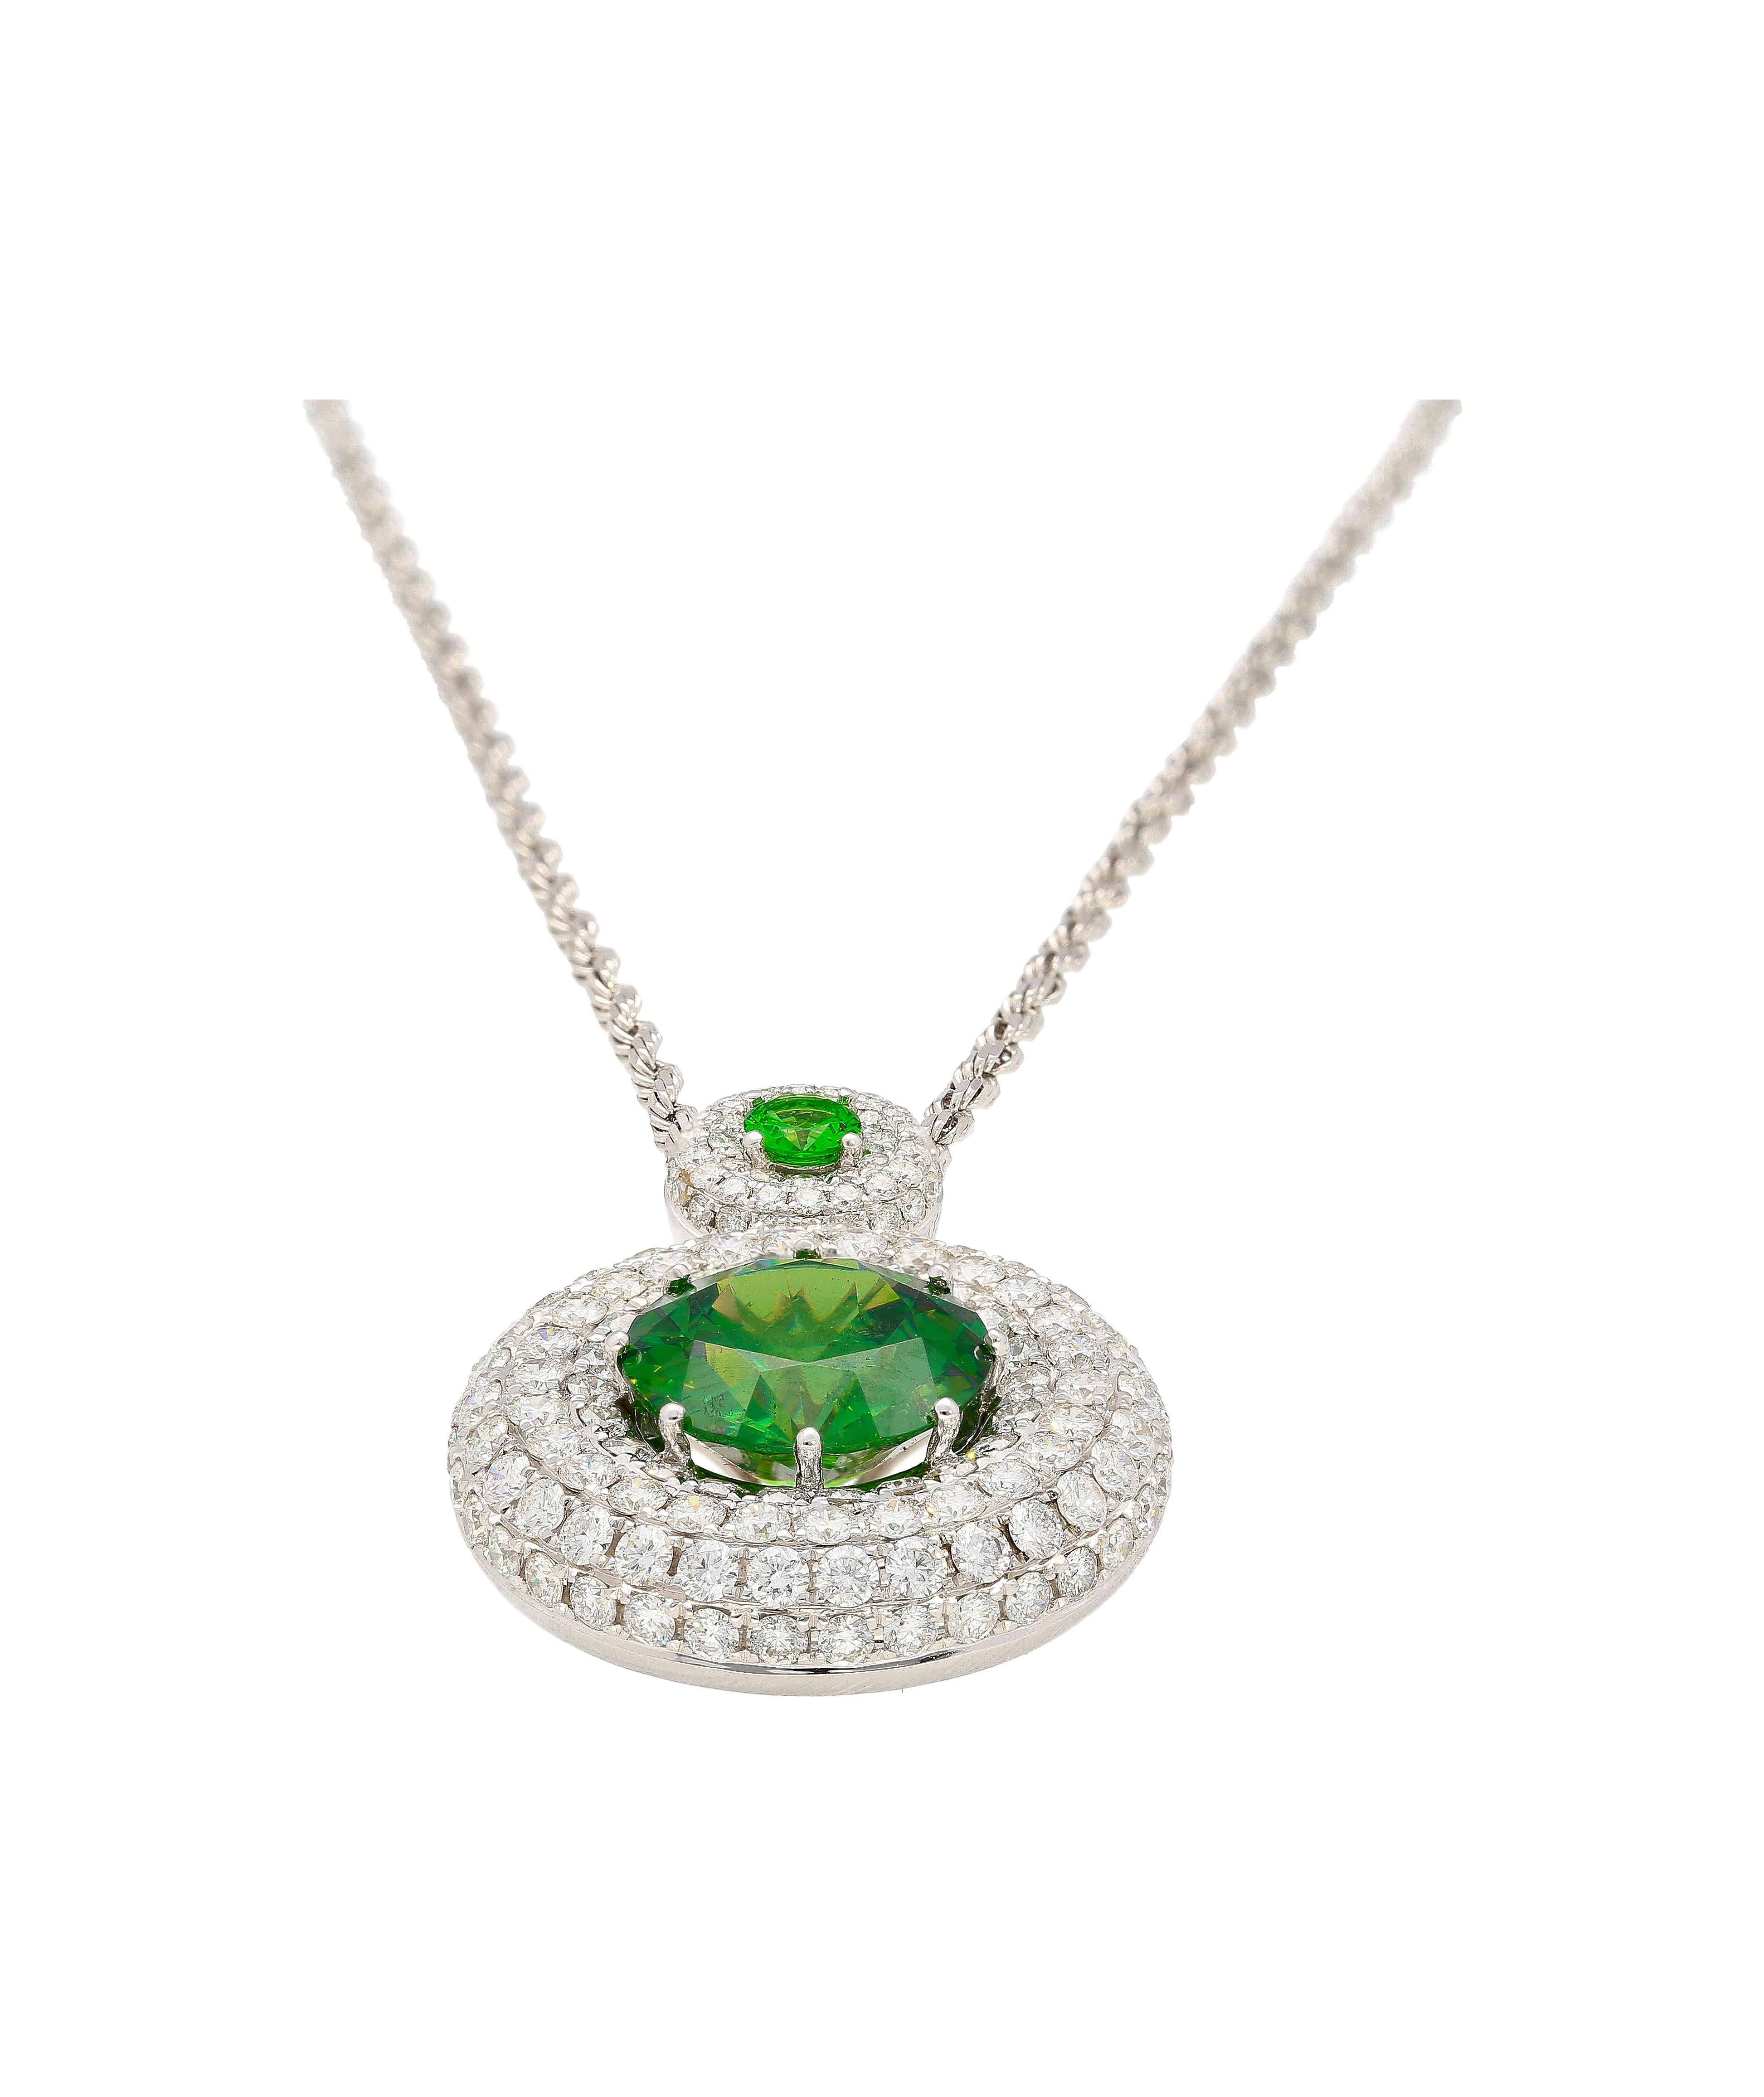 GIA Certified 8.58 Carat Demantoid Necklace w/ Diamond Halo in 18K White Gold For Sale 1